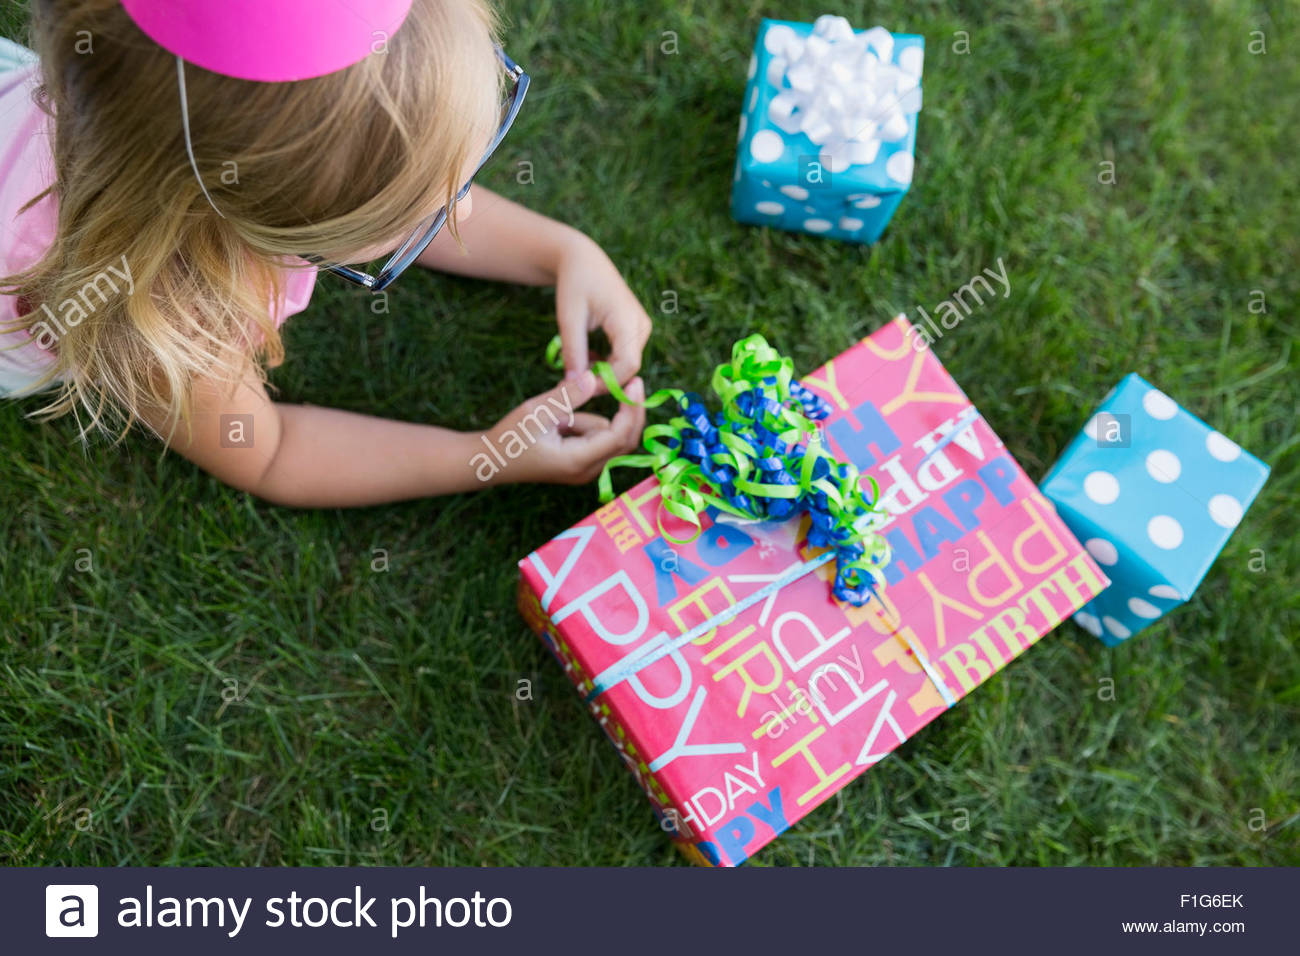 Overhead view girl with birthday gifts in grass Stock Photo